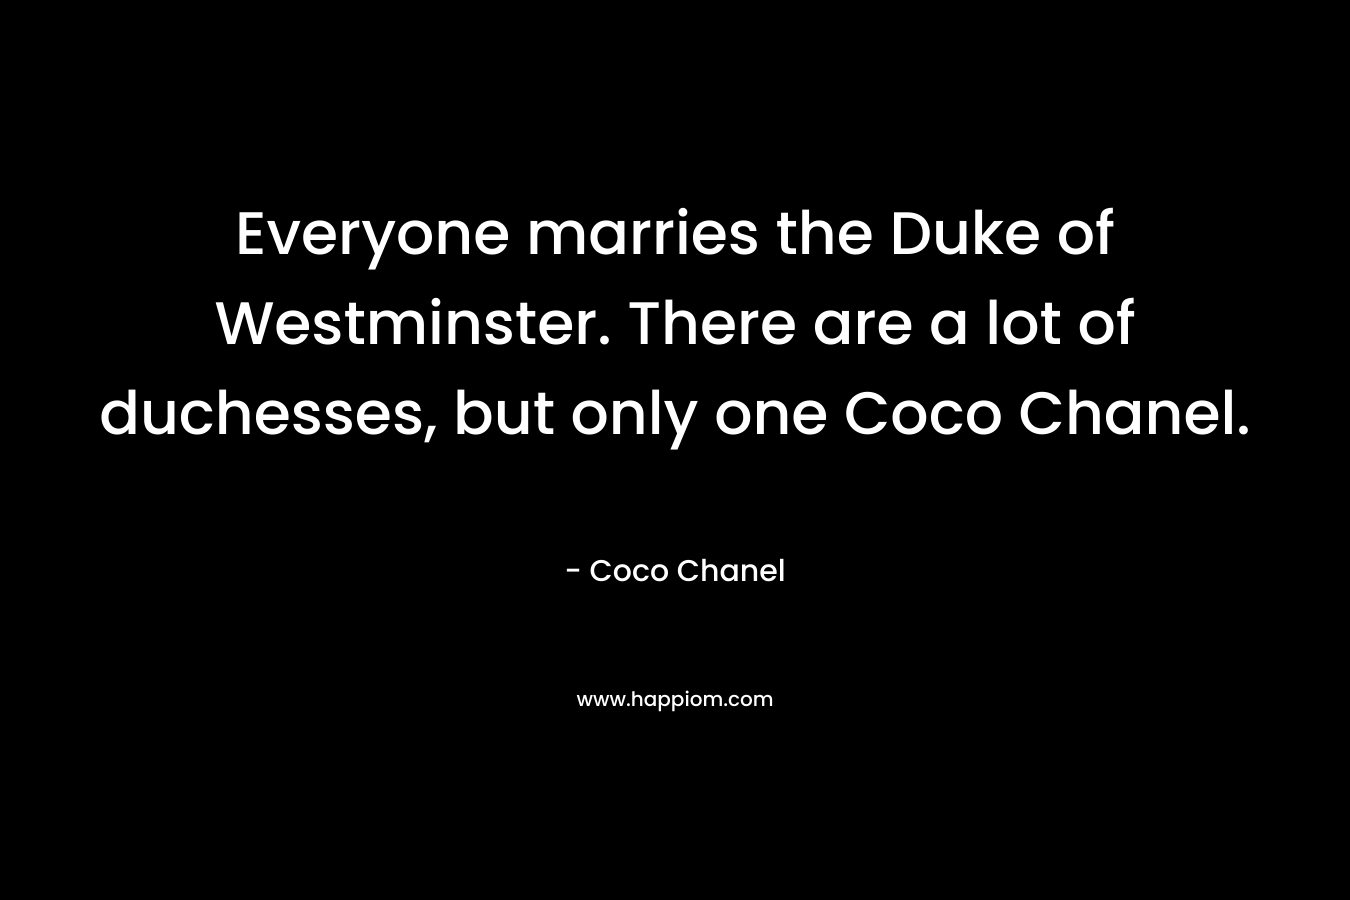 Everyone marries the Duke of Westminster. There are a lot of duchesses, but only one Coco Chanel. – Coco Chanel